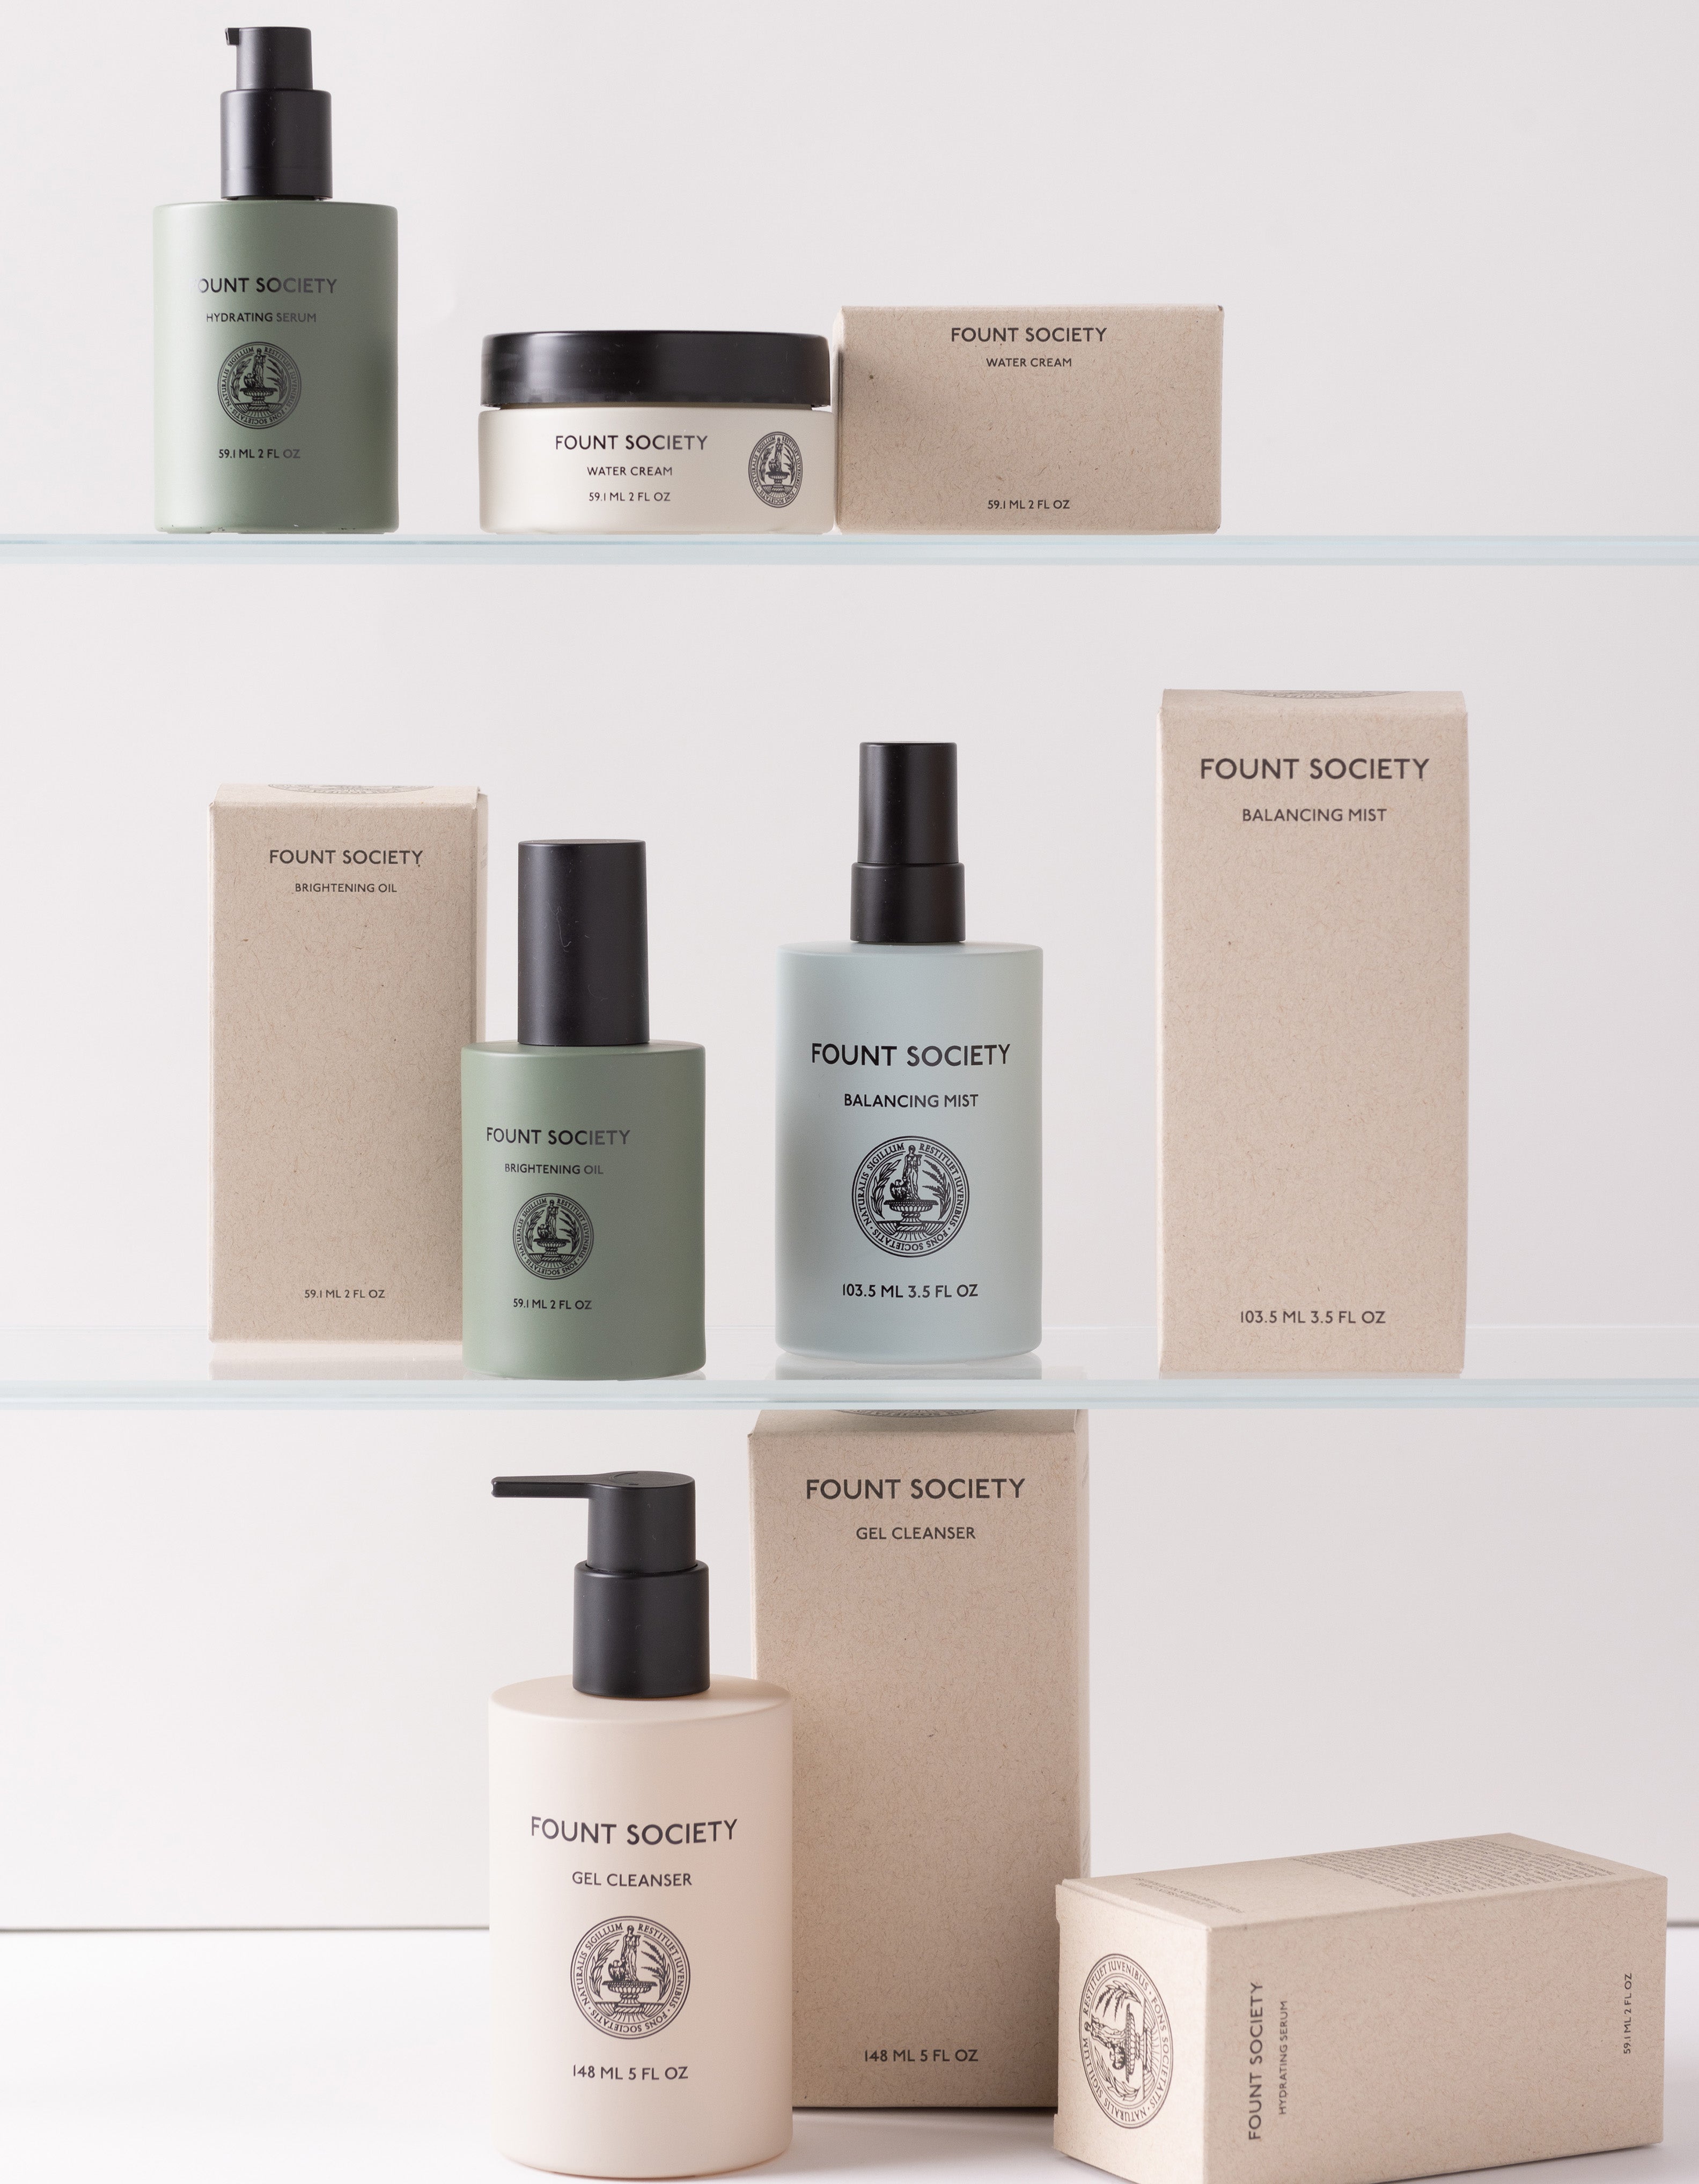 A display of Cozy Earth's The Routine skincare products on two shelves, featuring green and beige bottles, a white tub, and rectangular boxes. The items boast clean, minimalist packaging with a mix of pump bottles, spray bottles, and jars.